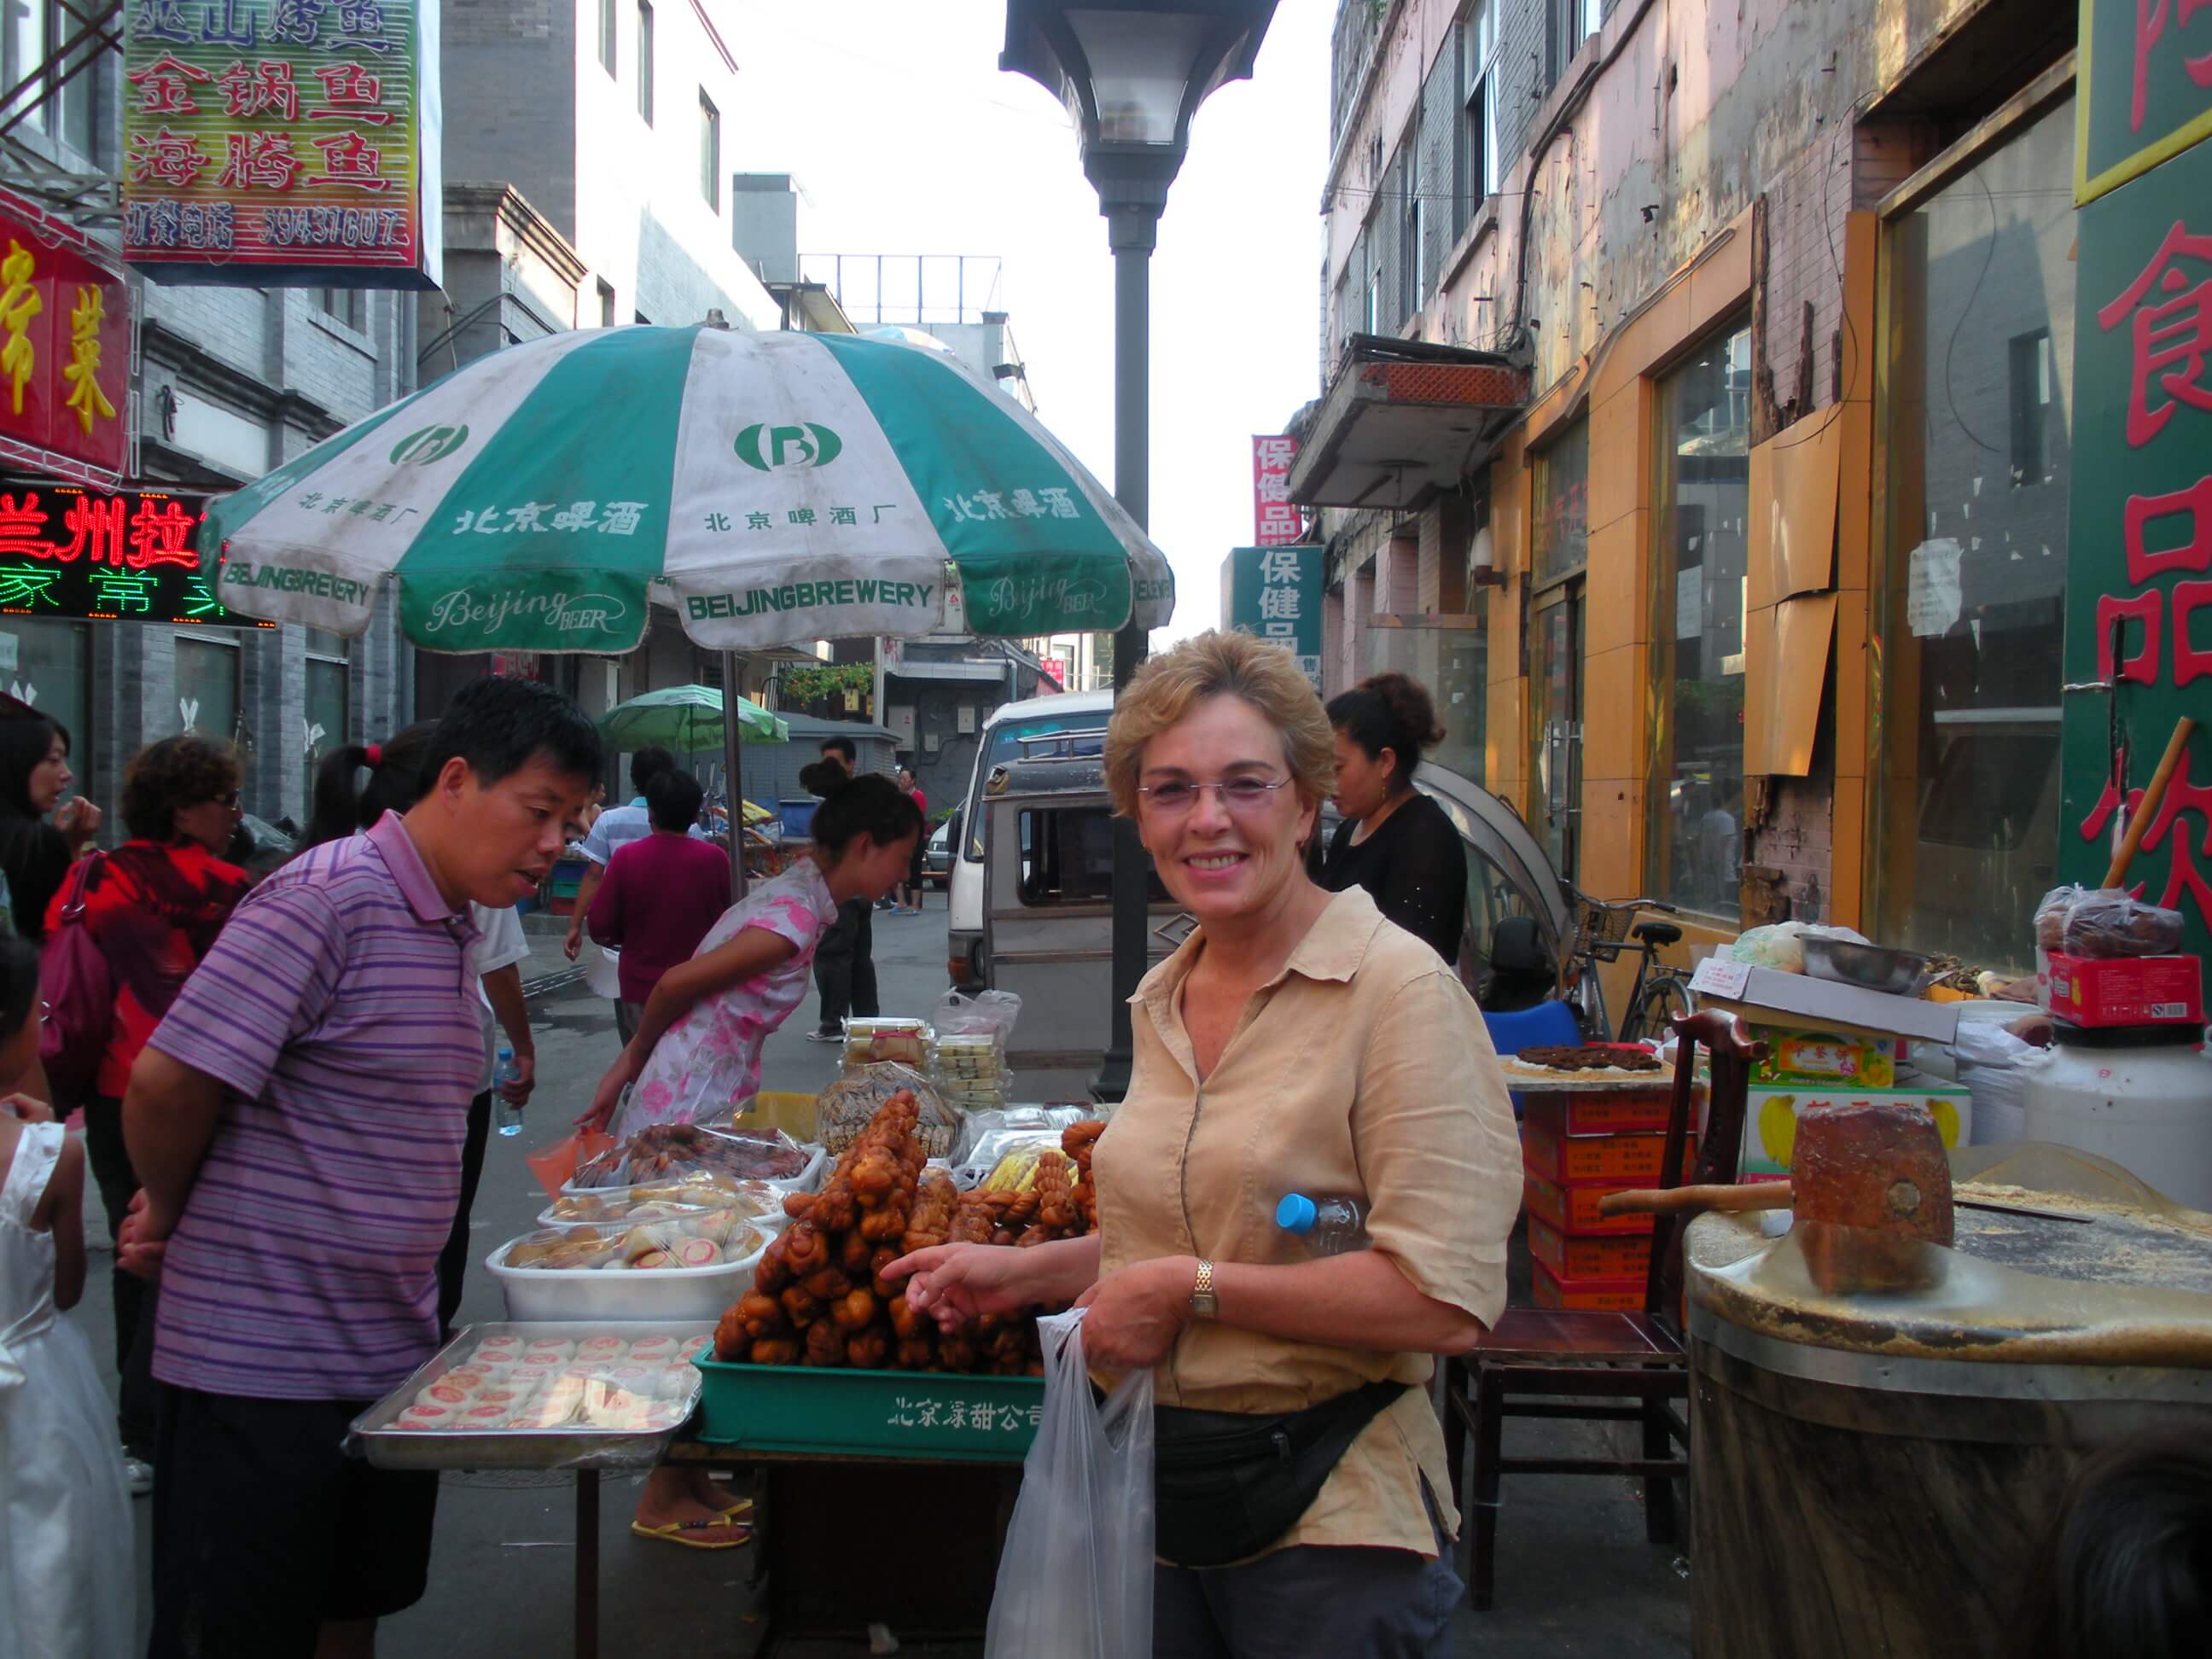 Exploring one of the cool things to do in Beijing's street food markets